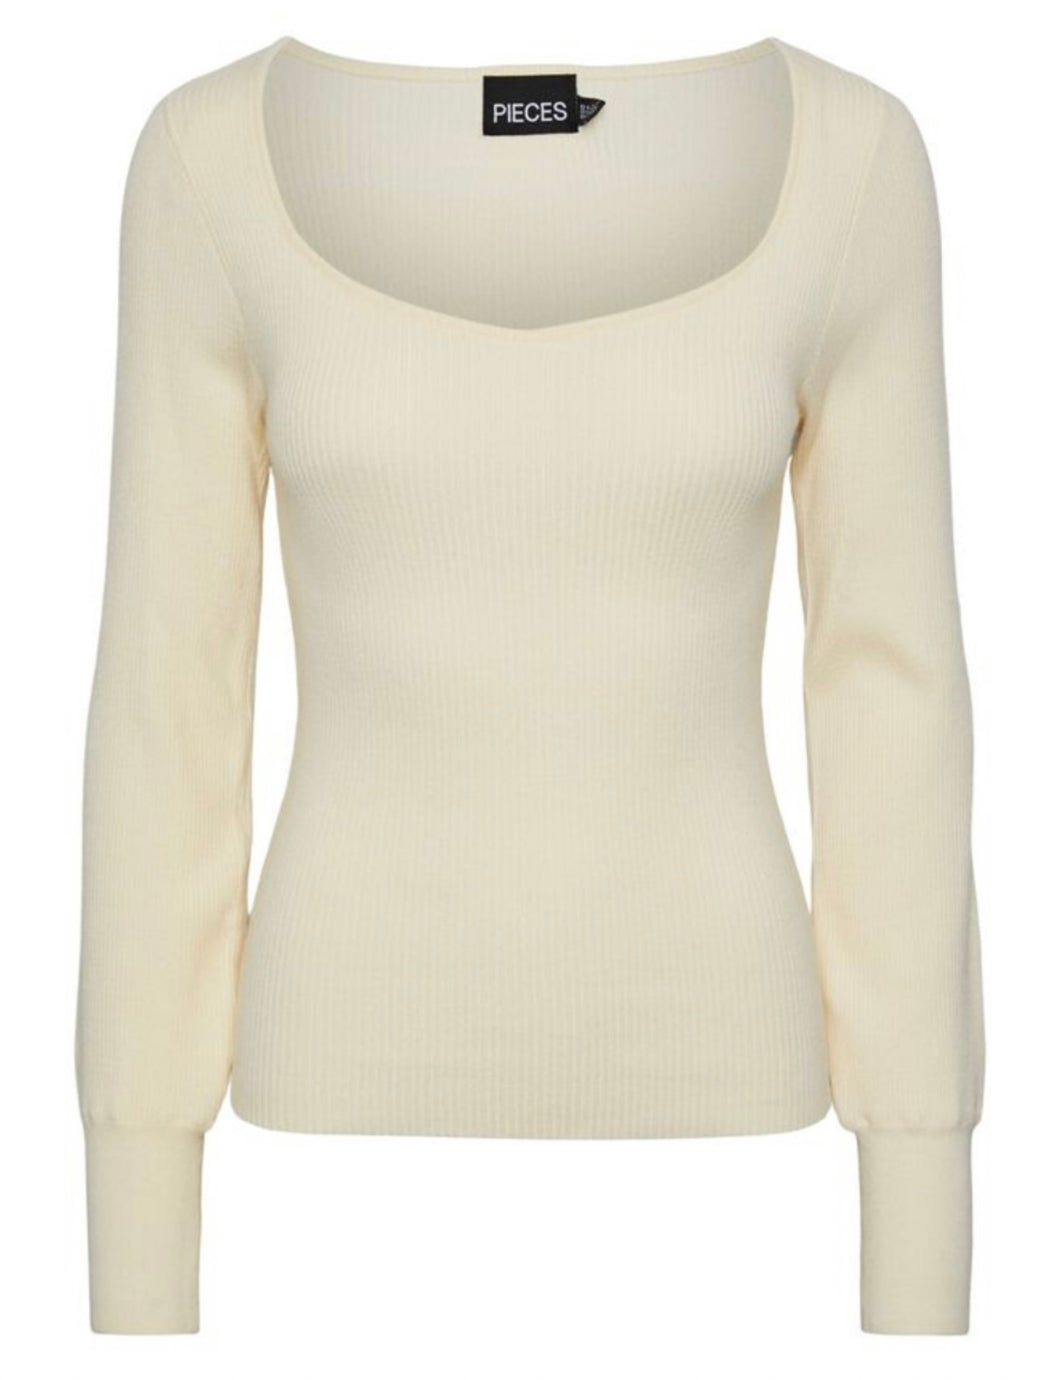 Pieces Clothing - Jamil knitted top